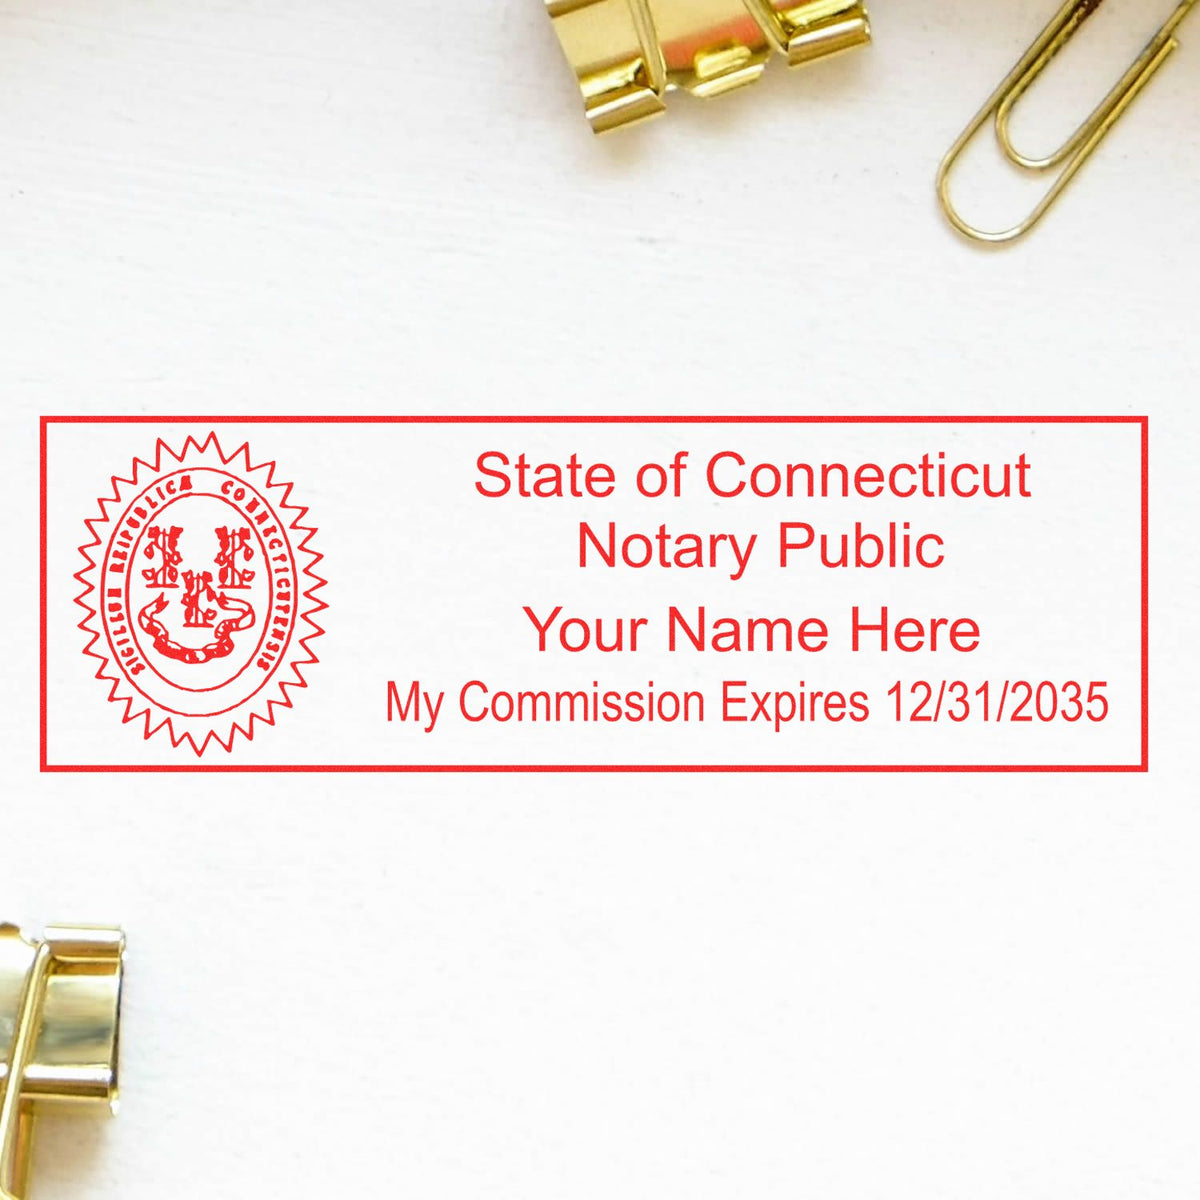 An alternative view of the MaxLight Premium Pre-Inked Connecticut State Seal Notarial Stamp stamped on a sheet of paper showing the image in use